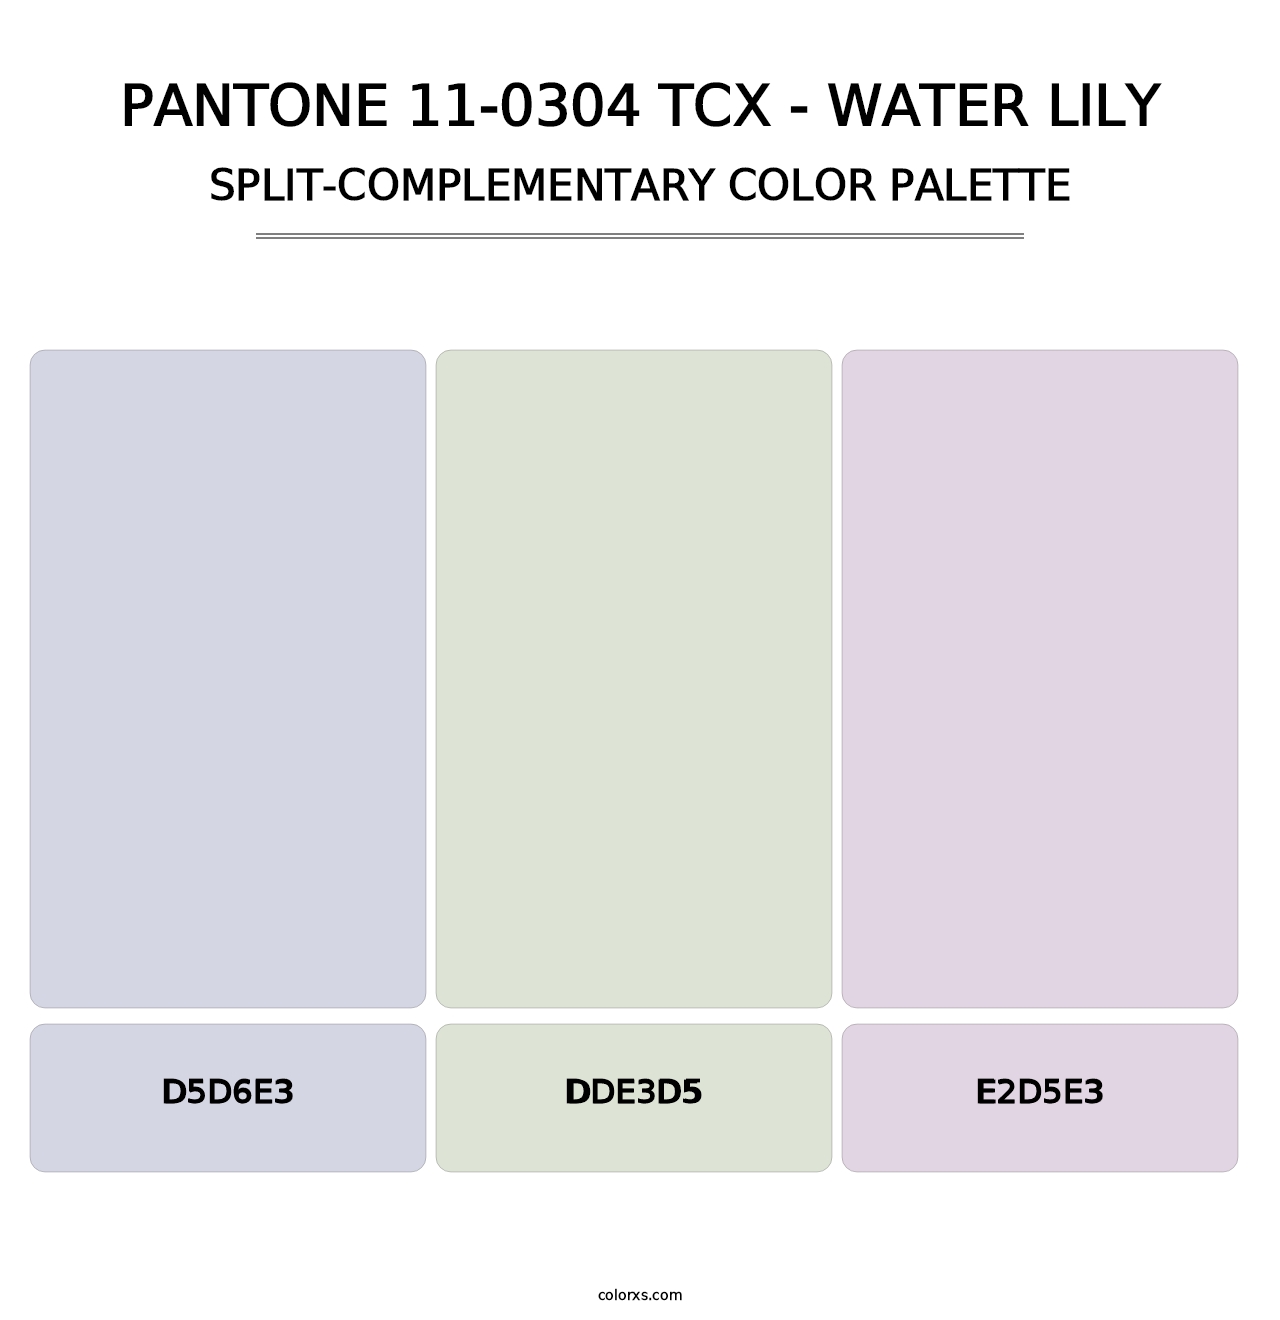 PANTONE 11-0304 TCX - Water Lily - Split-Complementary Color Palette